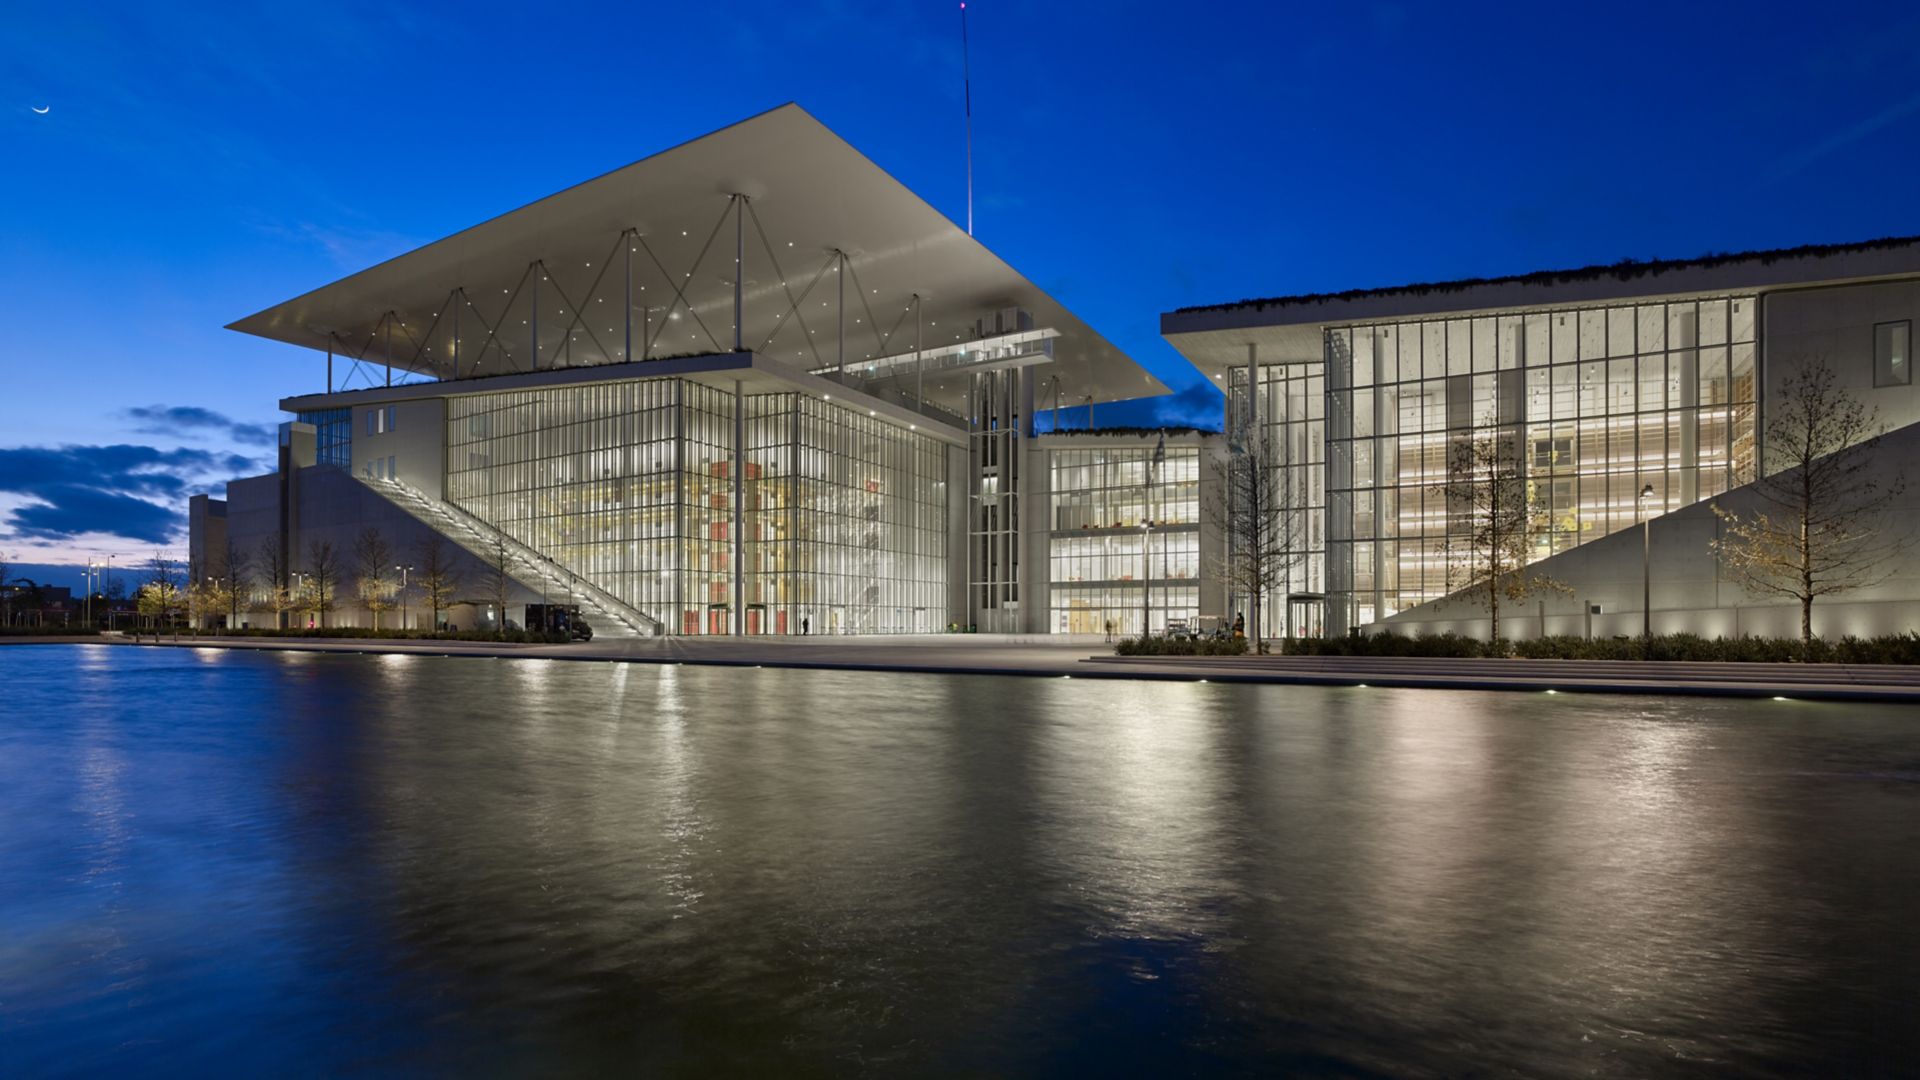 The Stavros Niarchos Foundation Cultural Center by night